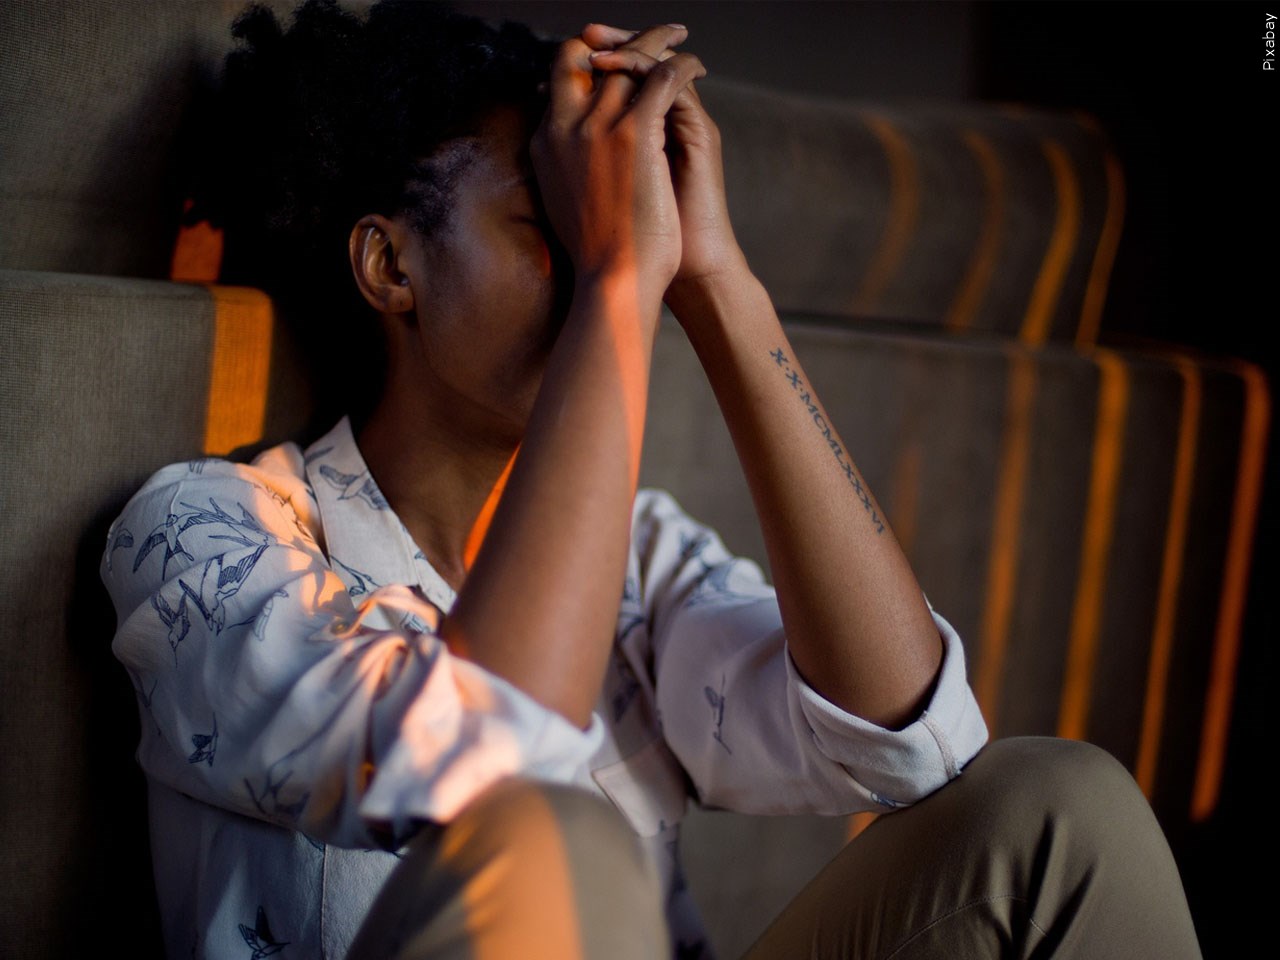 Minorities disproportionately impacted by mental health issues